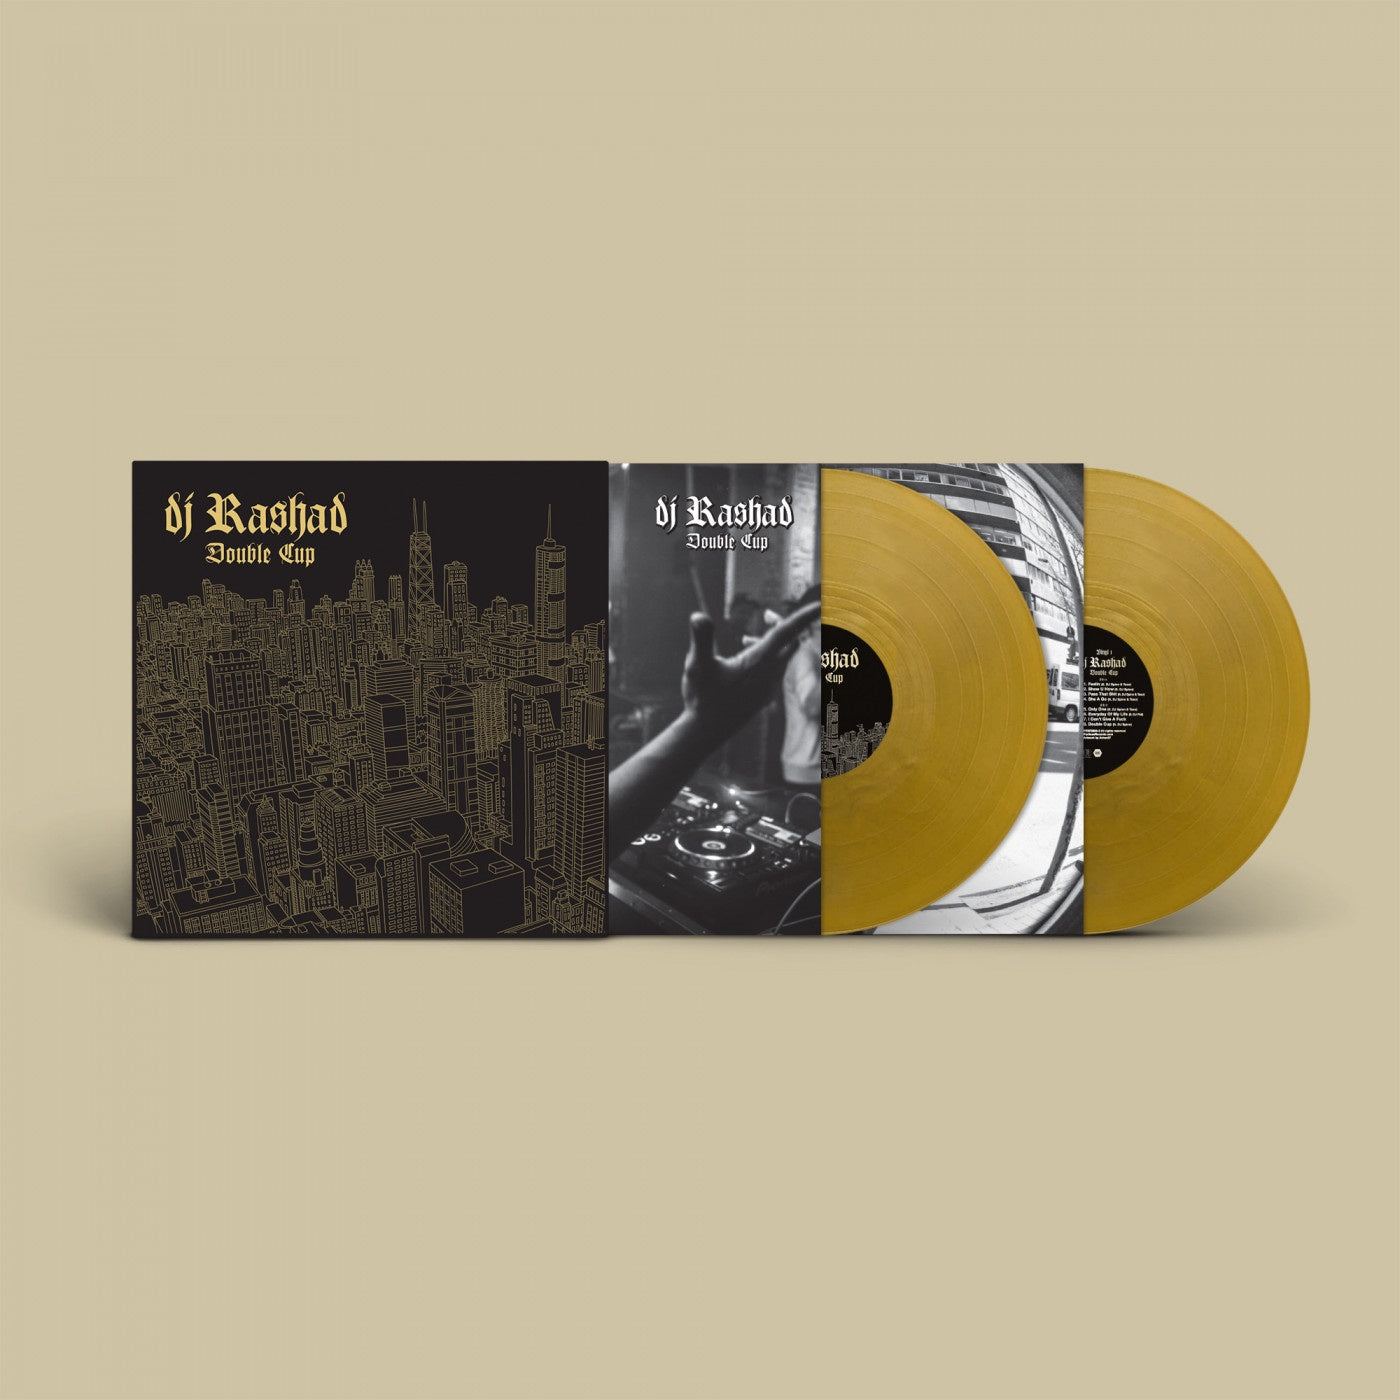 DJ Rashad – Double Cup (2013) - New 2 LP Record 2023 Partisan Gold Vinyl - Chicago Footwork / Juke / Ghetto House